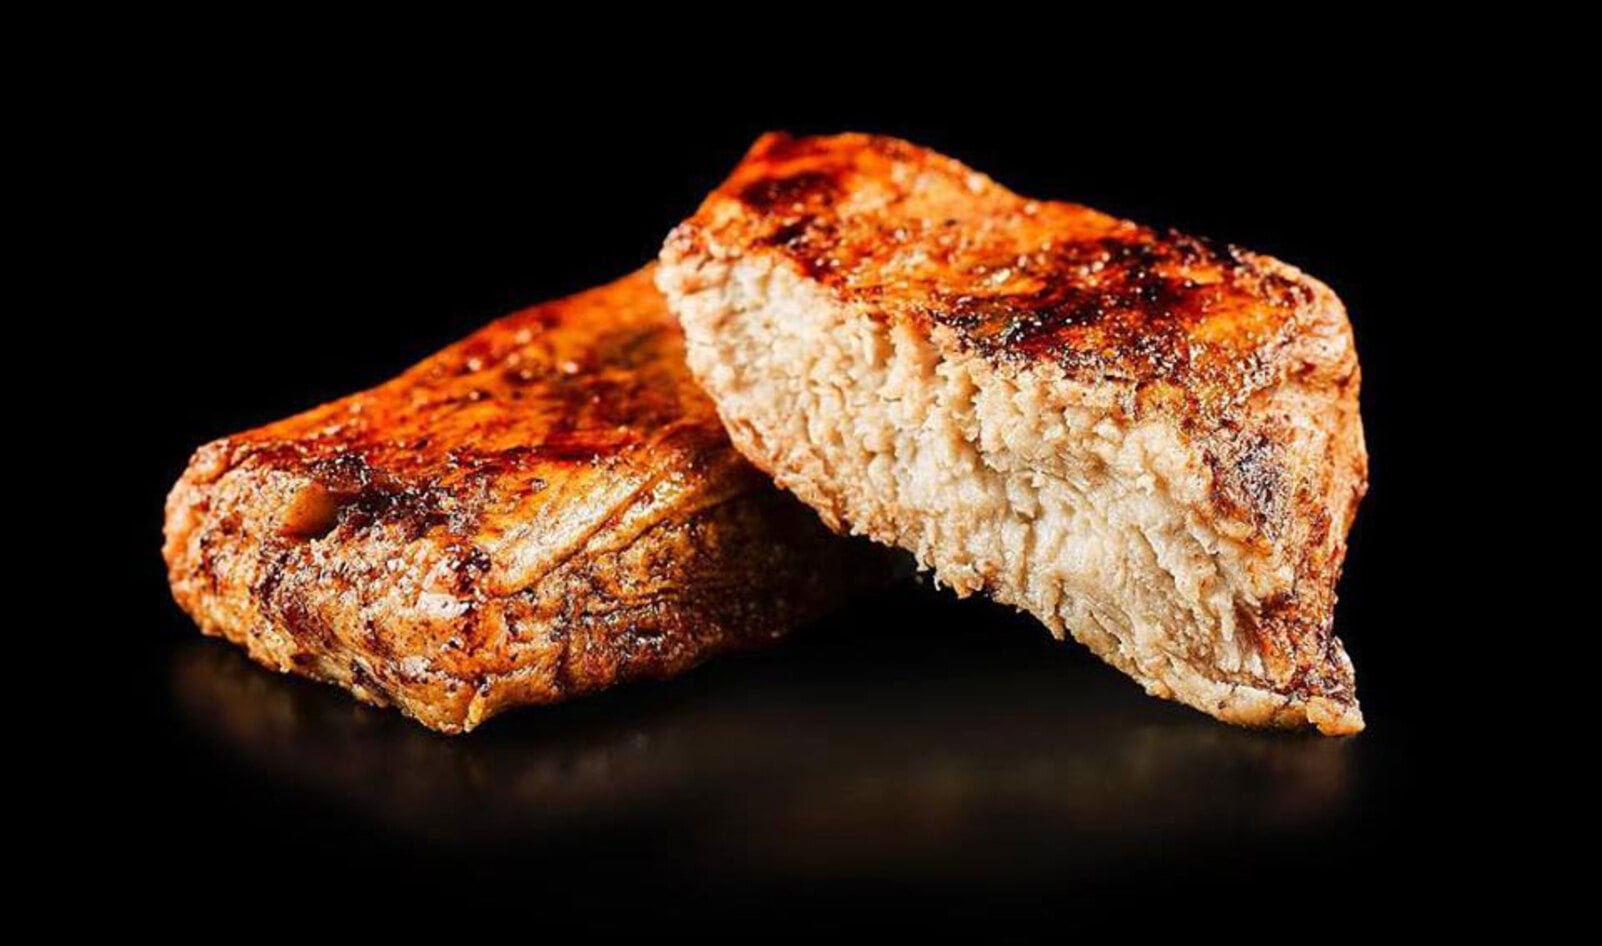 UK Butcher Shop to Sell Vegan Bacon and Chicken